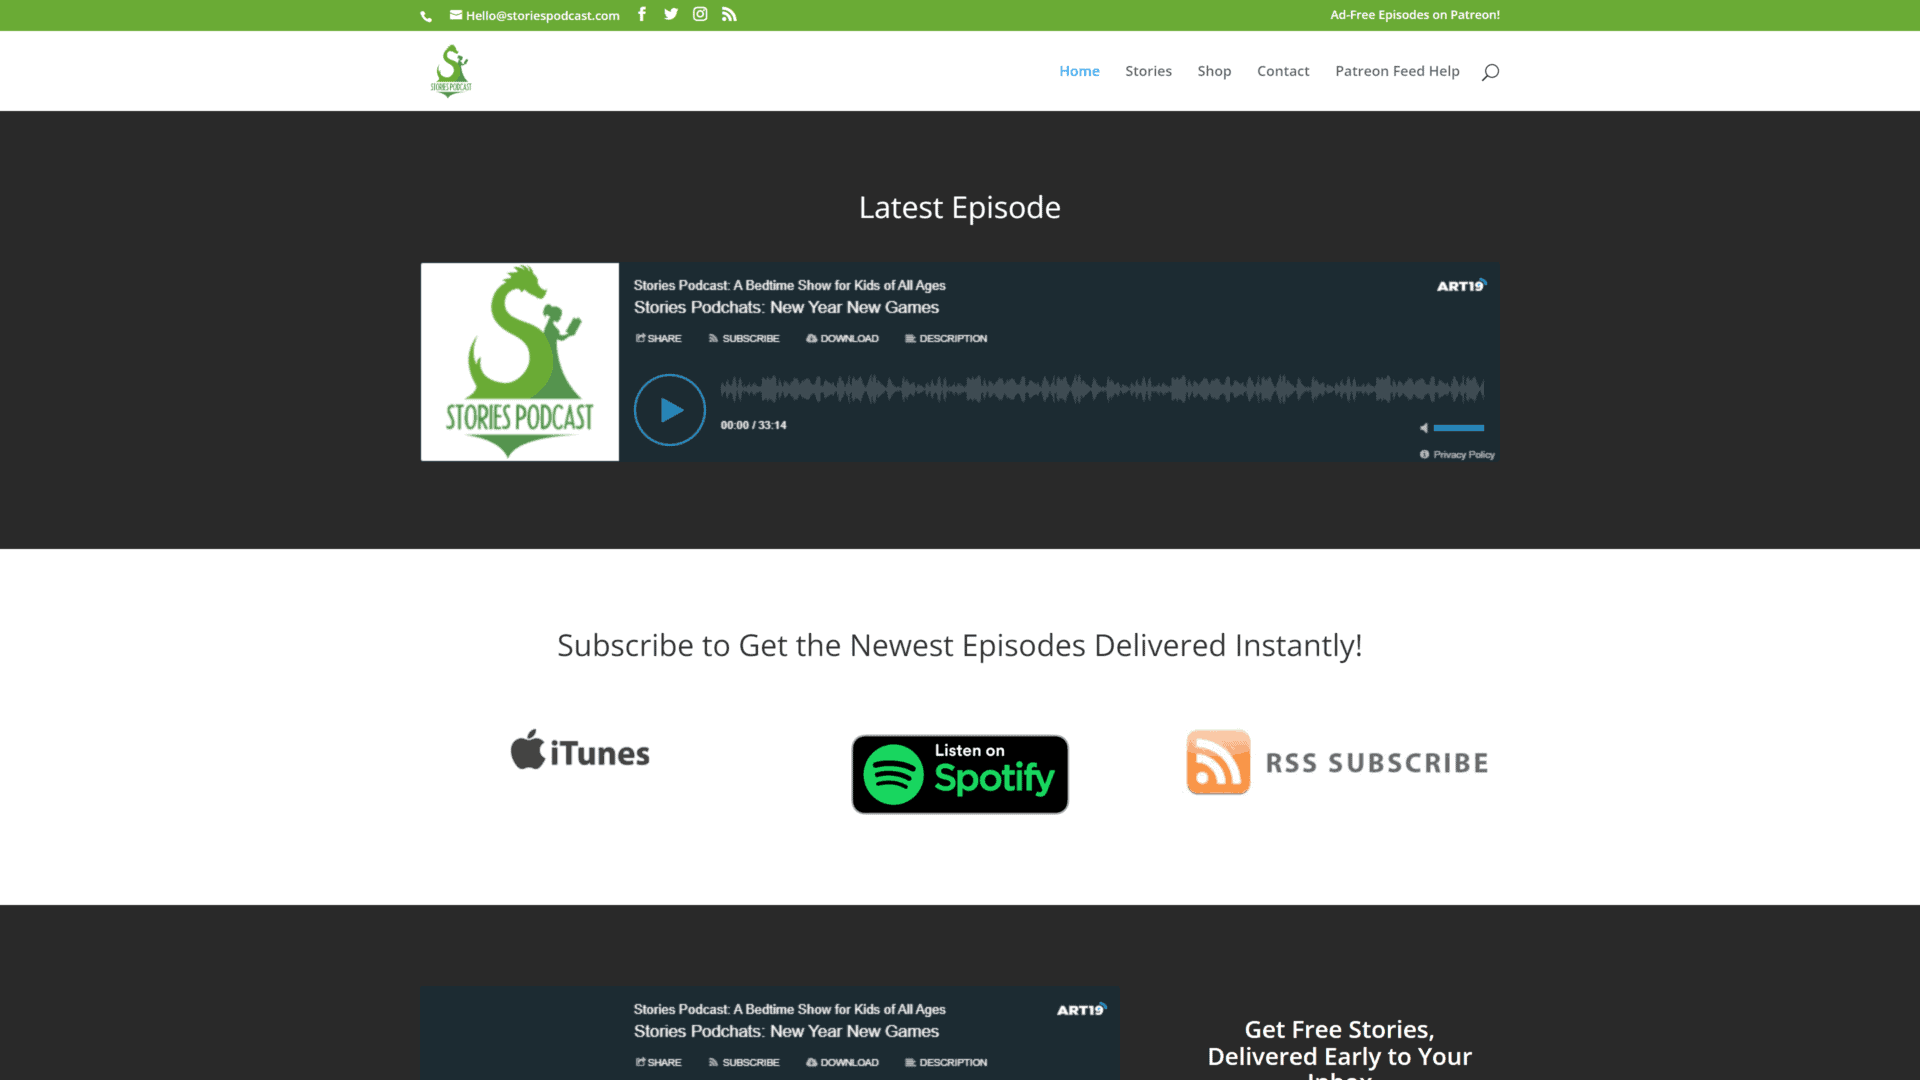 screenshot of the stories podcast homepage